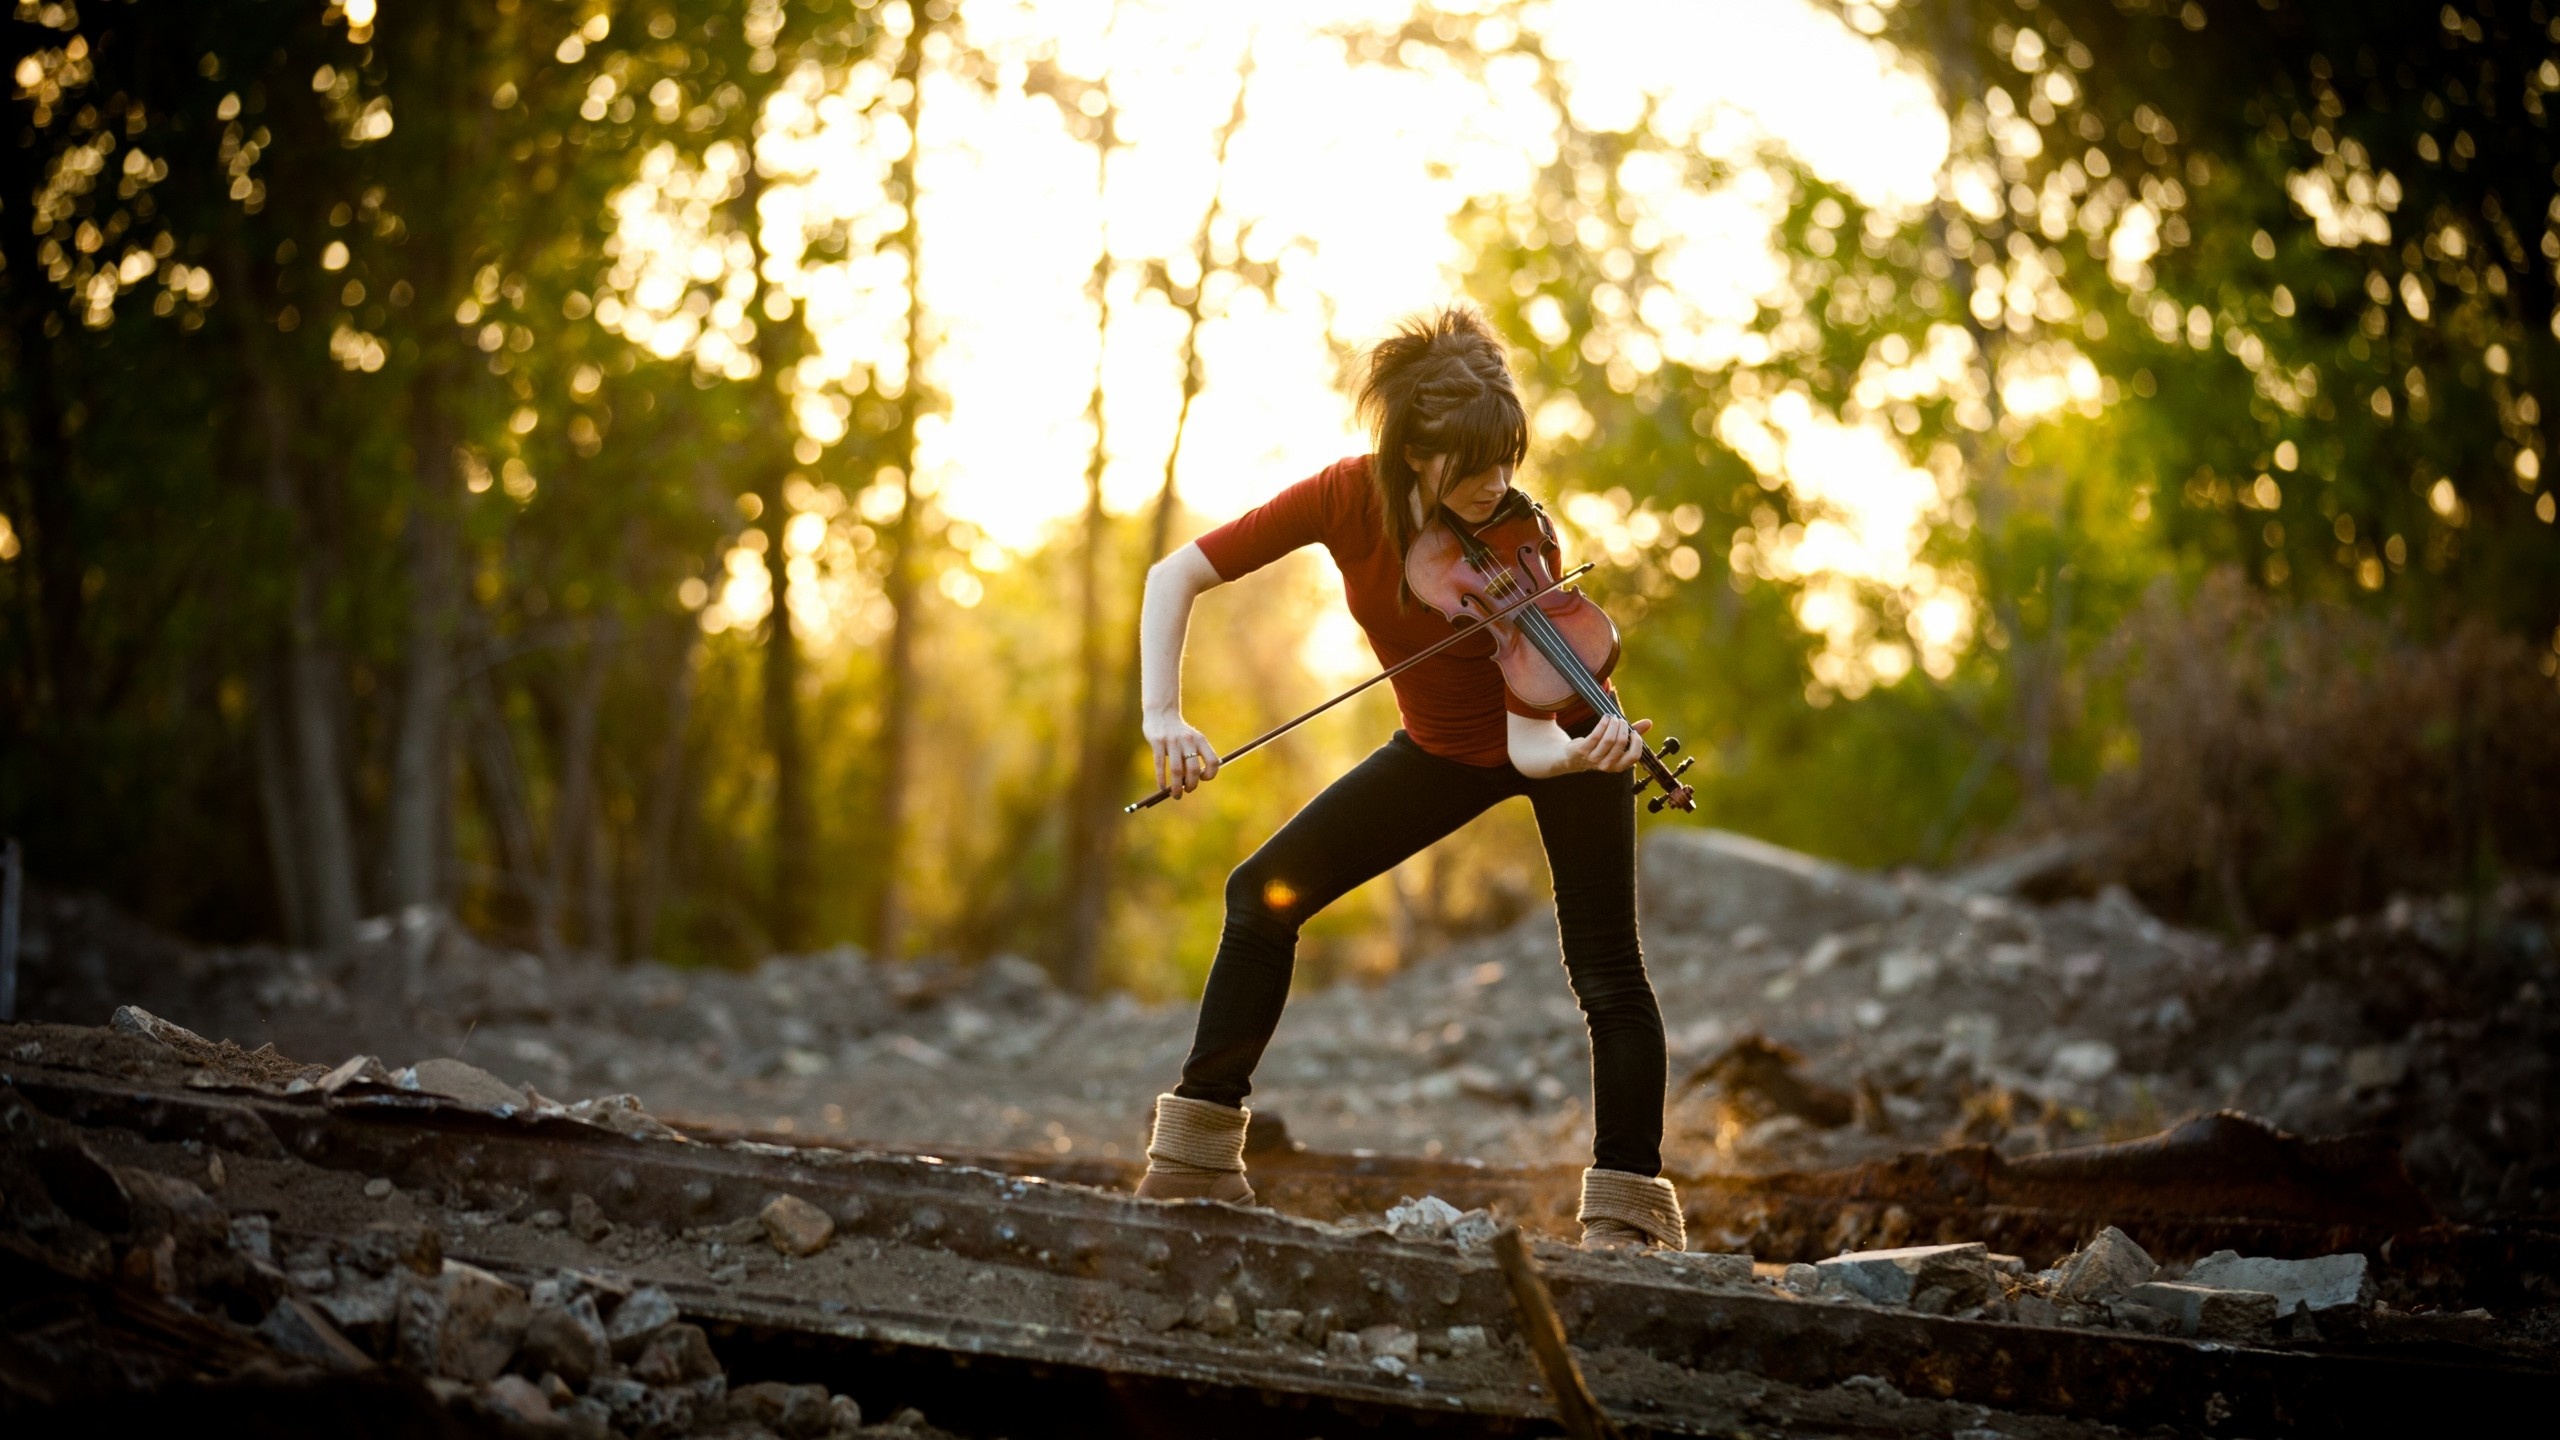 Lindsey Stirling, Music and violin, Creative wallpaper, Captivating imagery, 2560x1440 HD Desktop